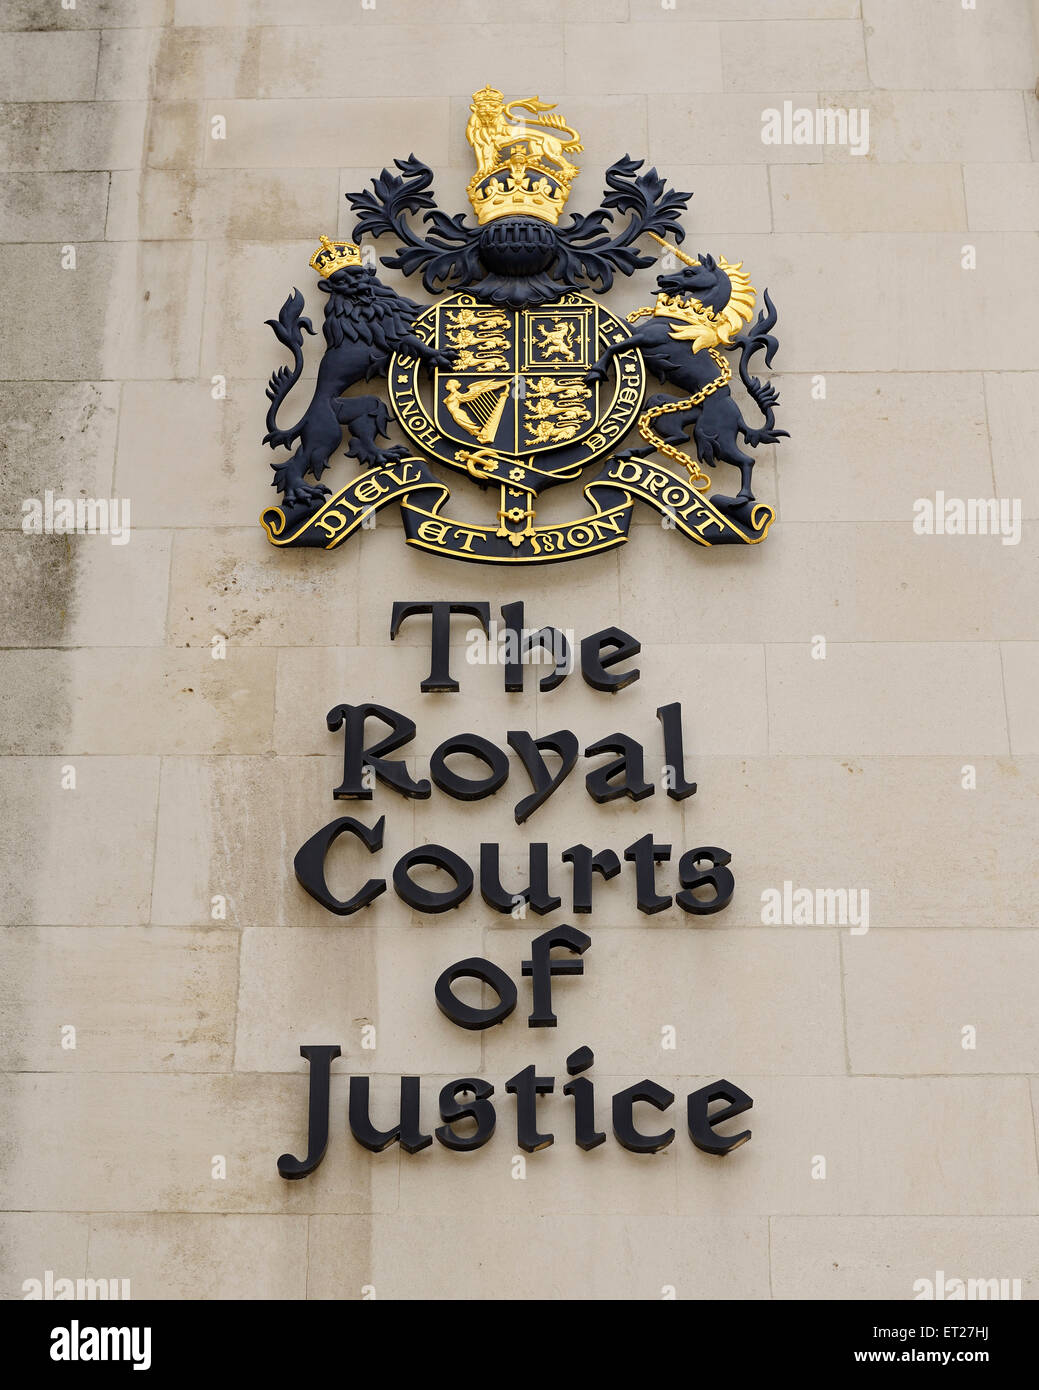 The Royal Courts of Justice, London, UK. The building accommodates the High Court and the Court of Appeal. Stock Photo